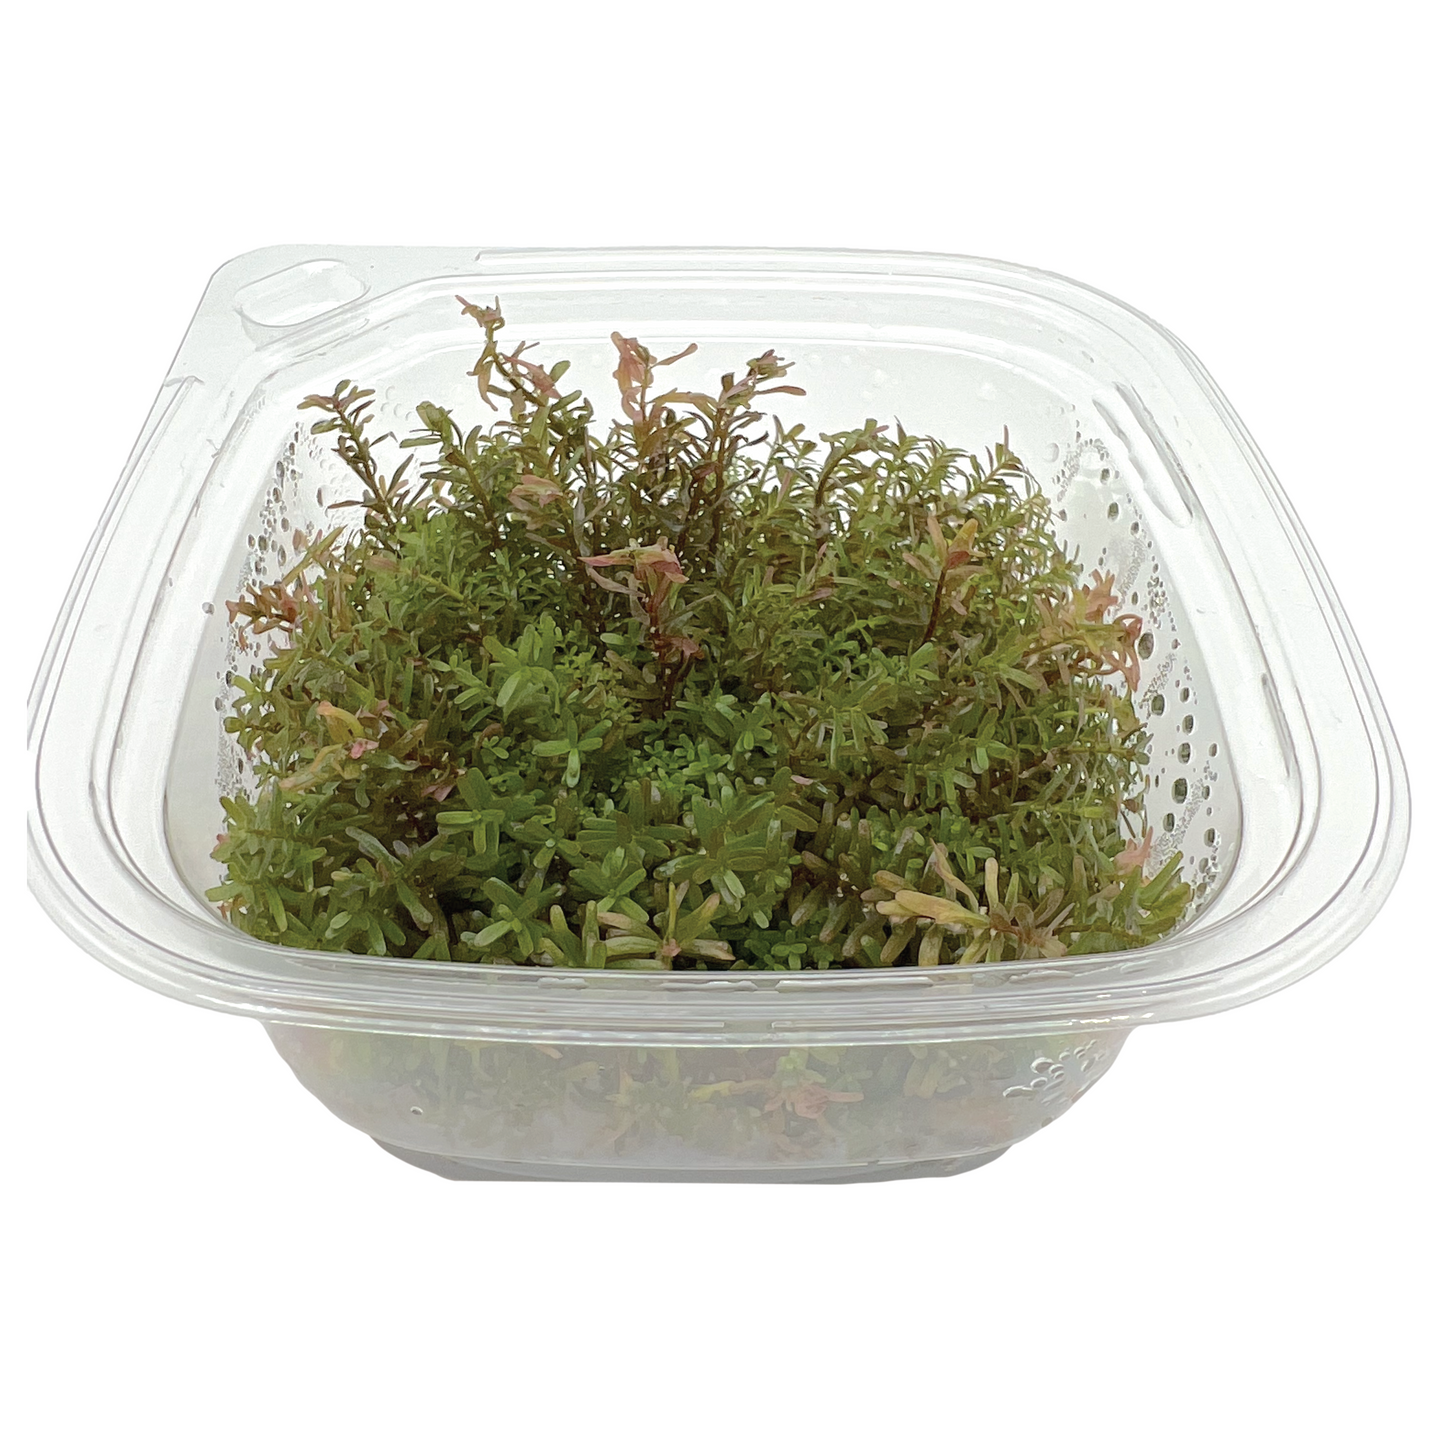 Rotala sp. ‘Hra’ Large 4x4" cup